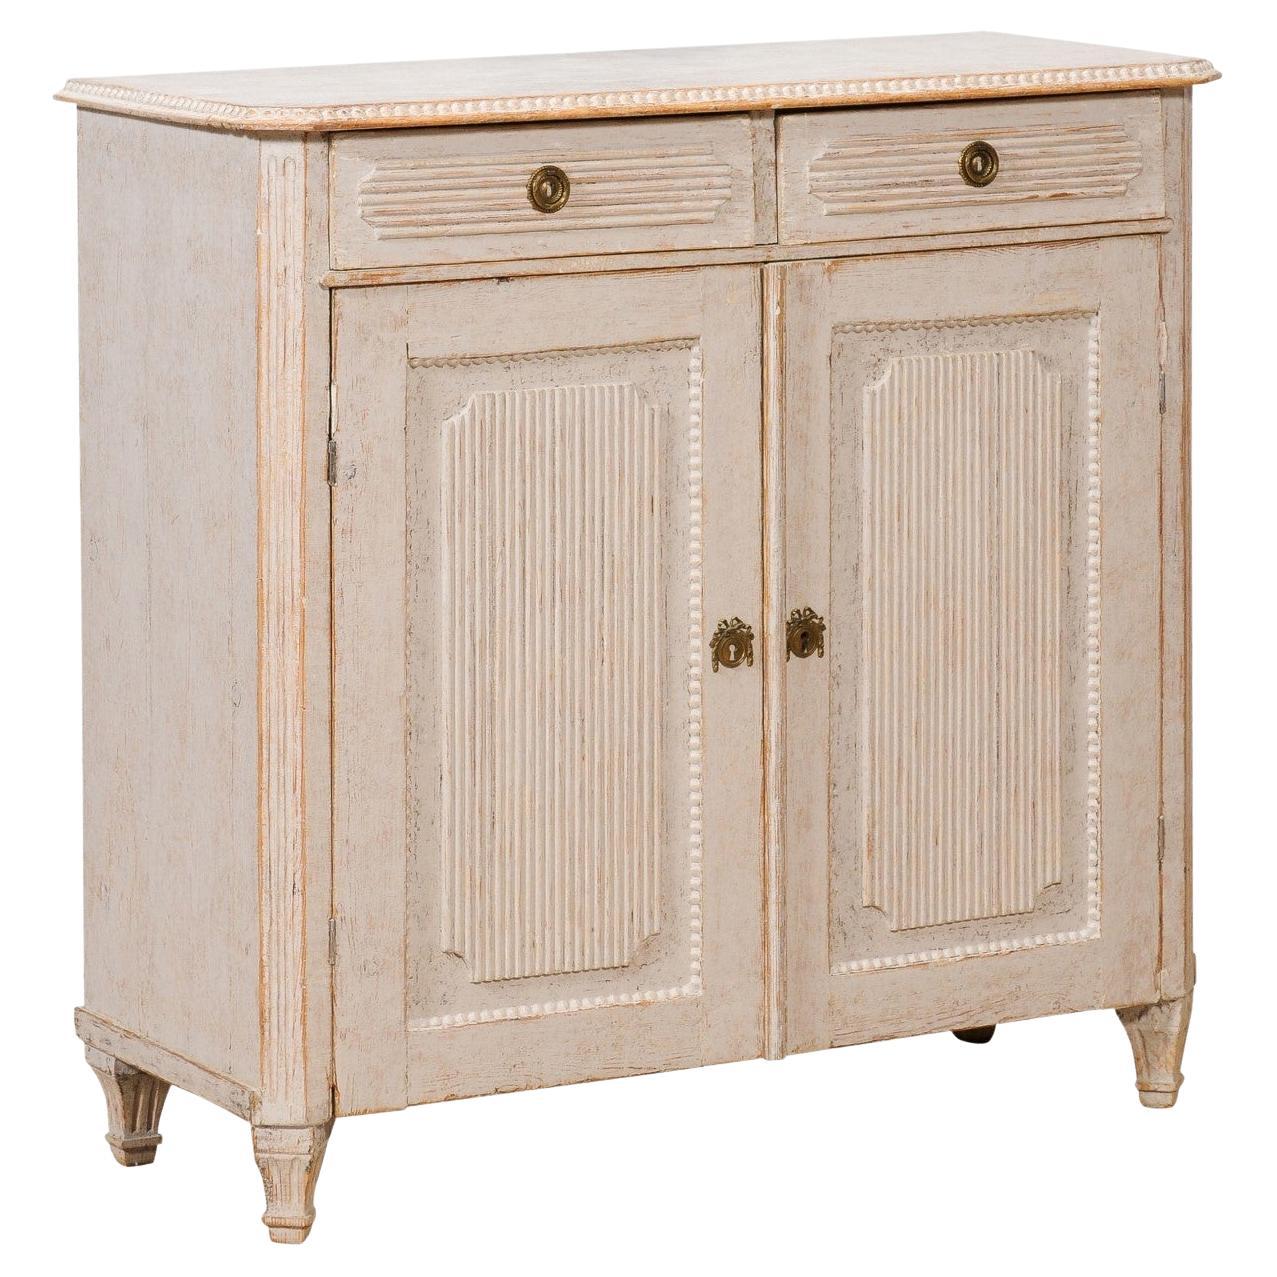 1820s Swedish Gustavian Period Buffet with Carved Reeded Accents For Sale